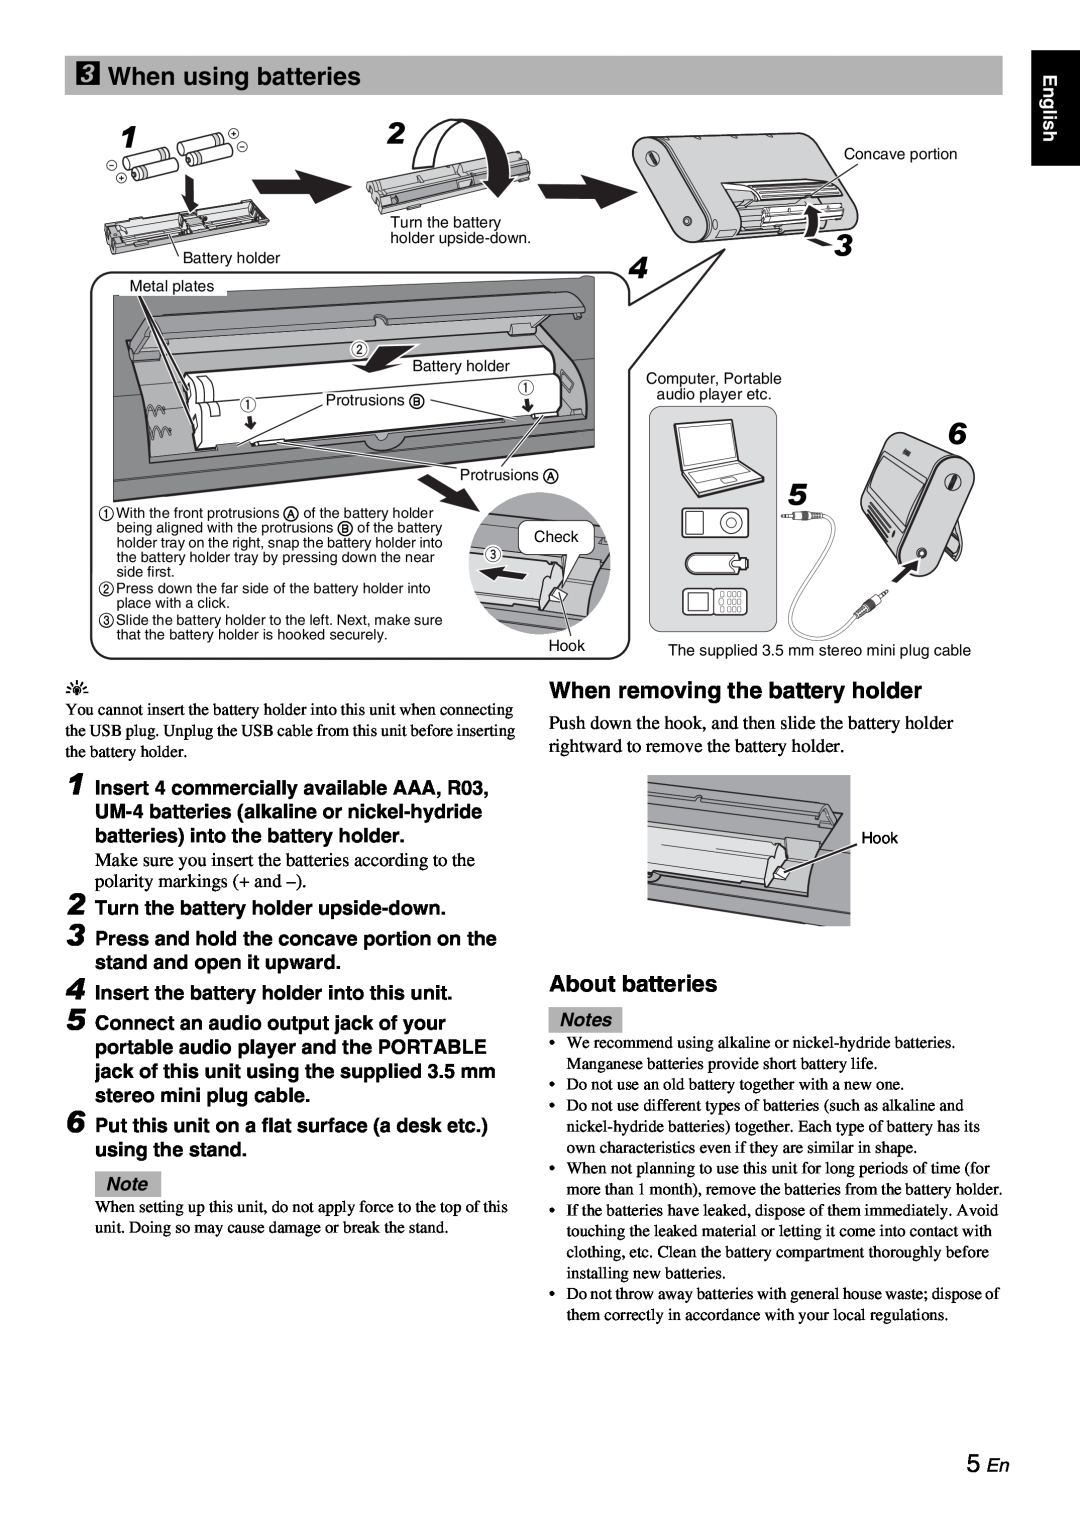 Yamaha Multimedia Speaker, NX-U10 When using batteries, When removing the battery holder, About batteries, 5 En, English 